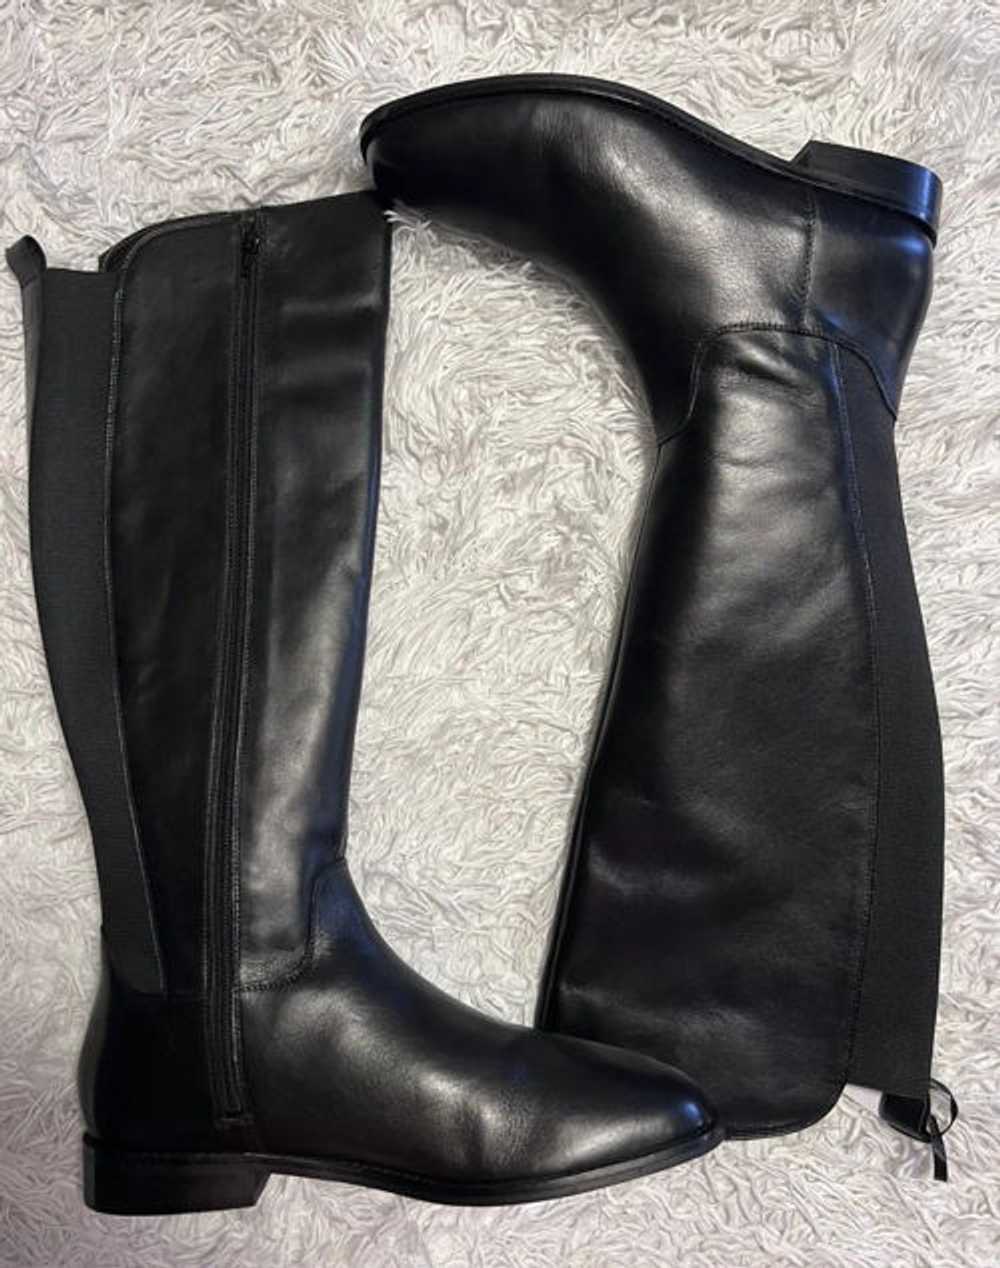 Tall Size Knee high boots - image 3